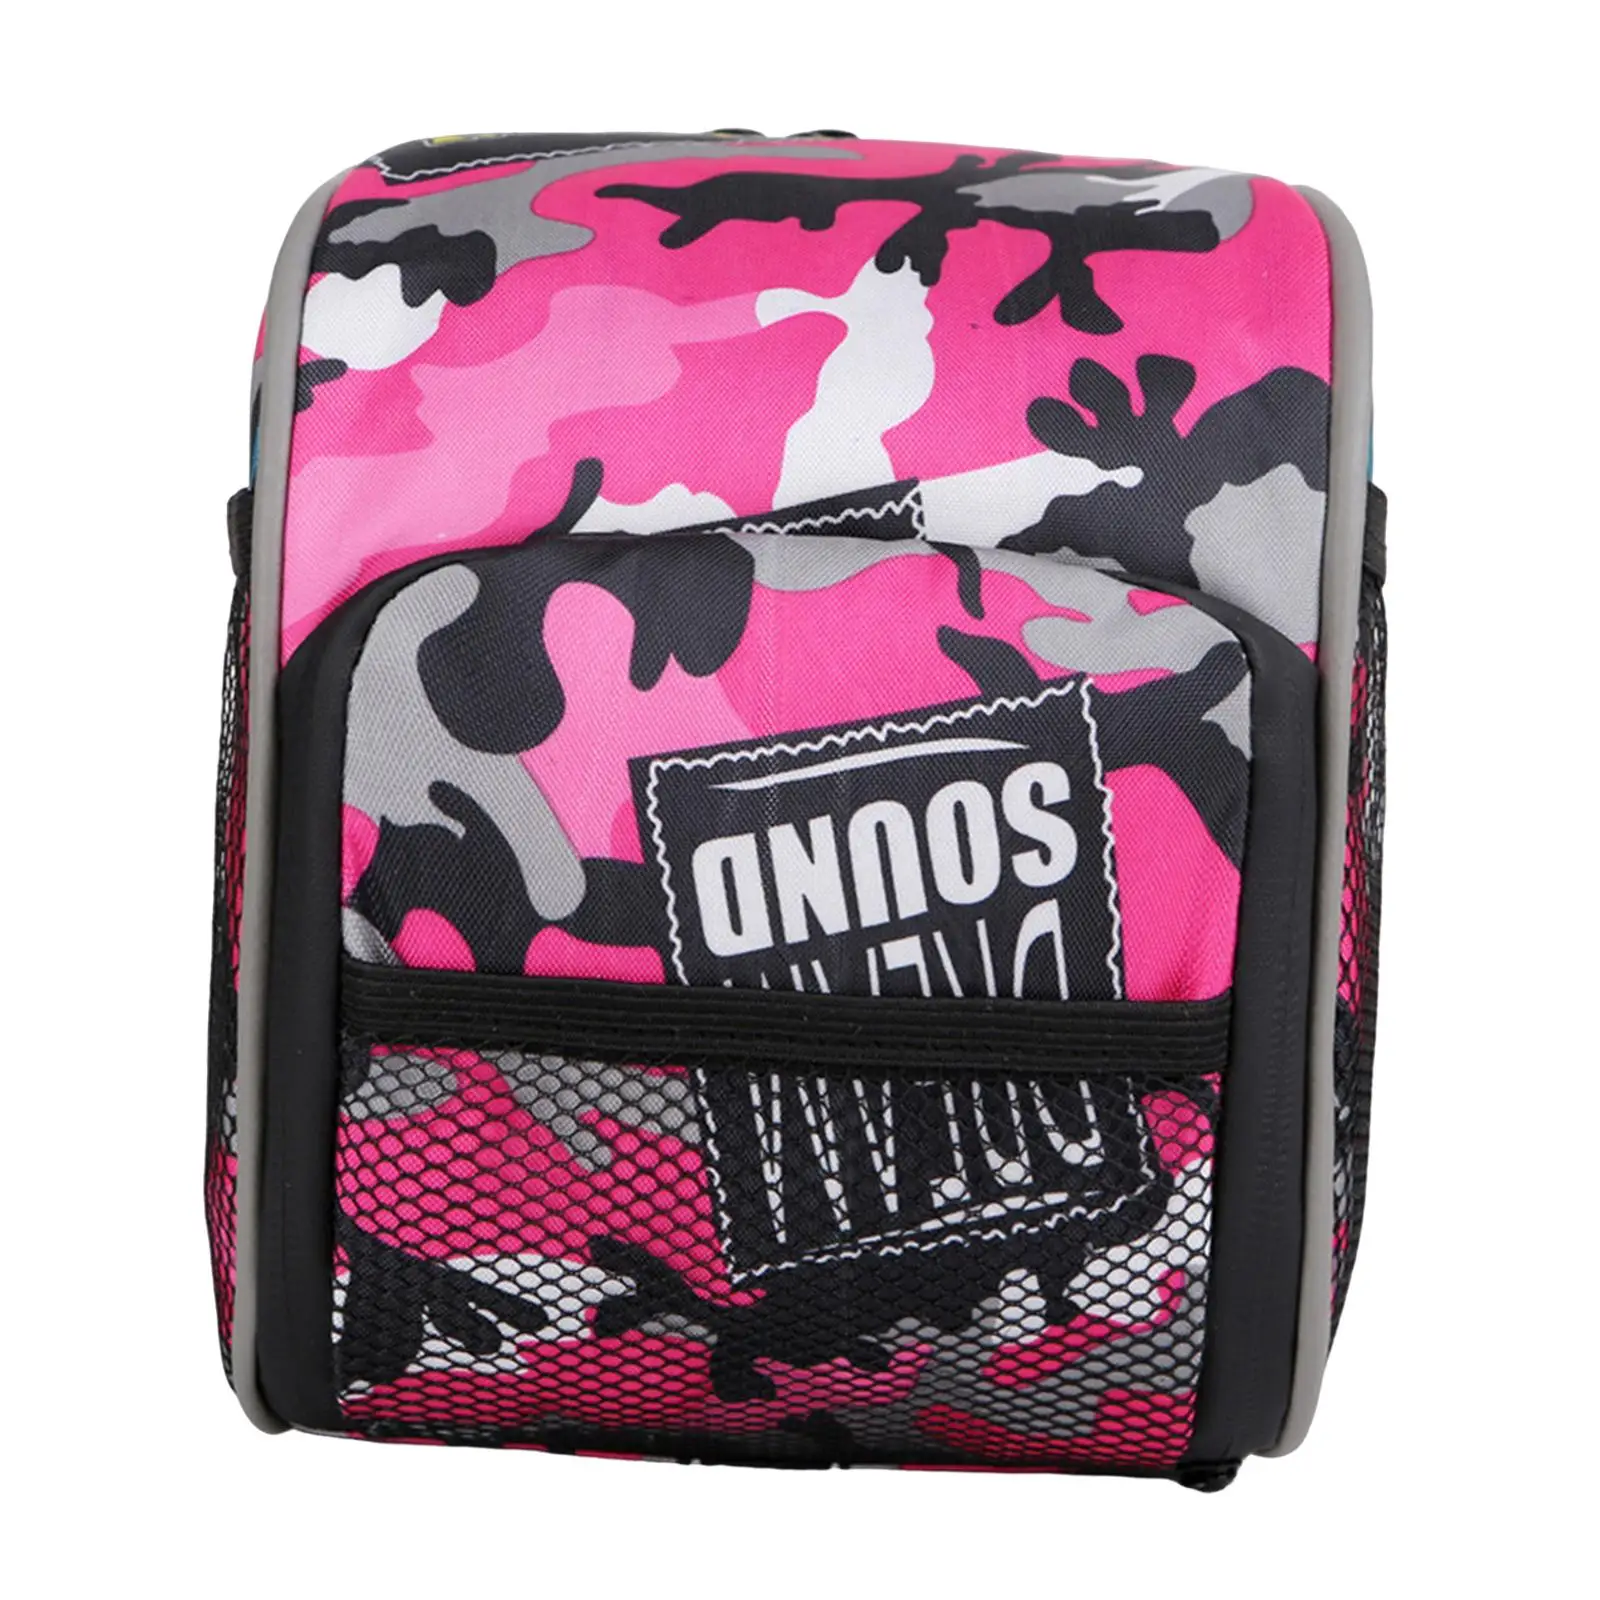 Bicycle Front Bag Bicycle Handlebar Bag Storage Bag for Riding Electric Bicycles Tricycles Road Mountain Bike Motorcycles